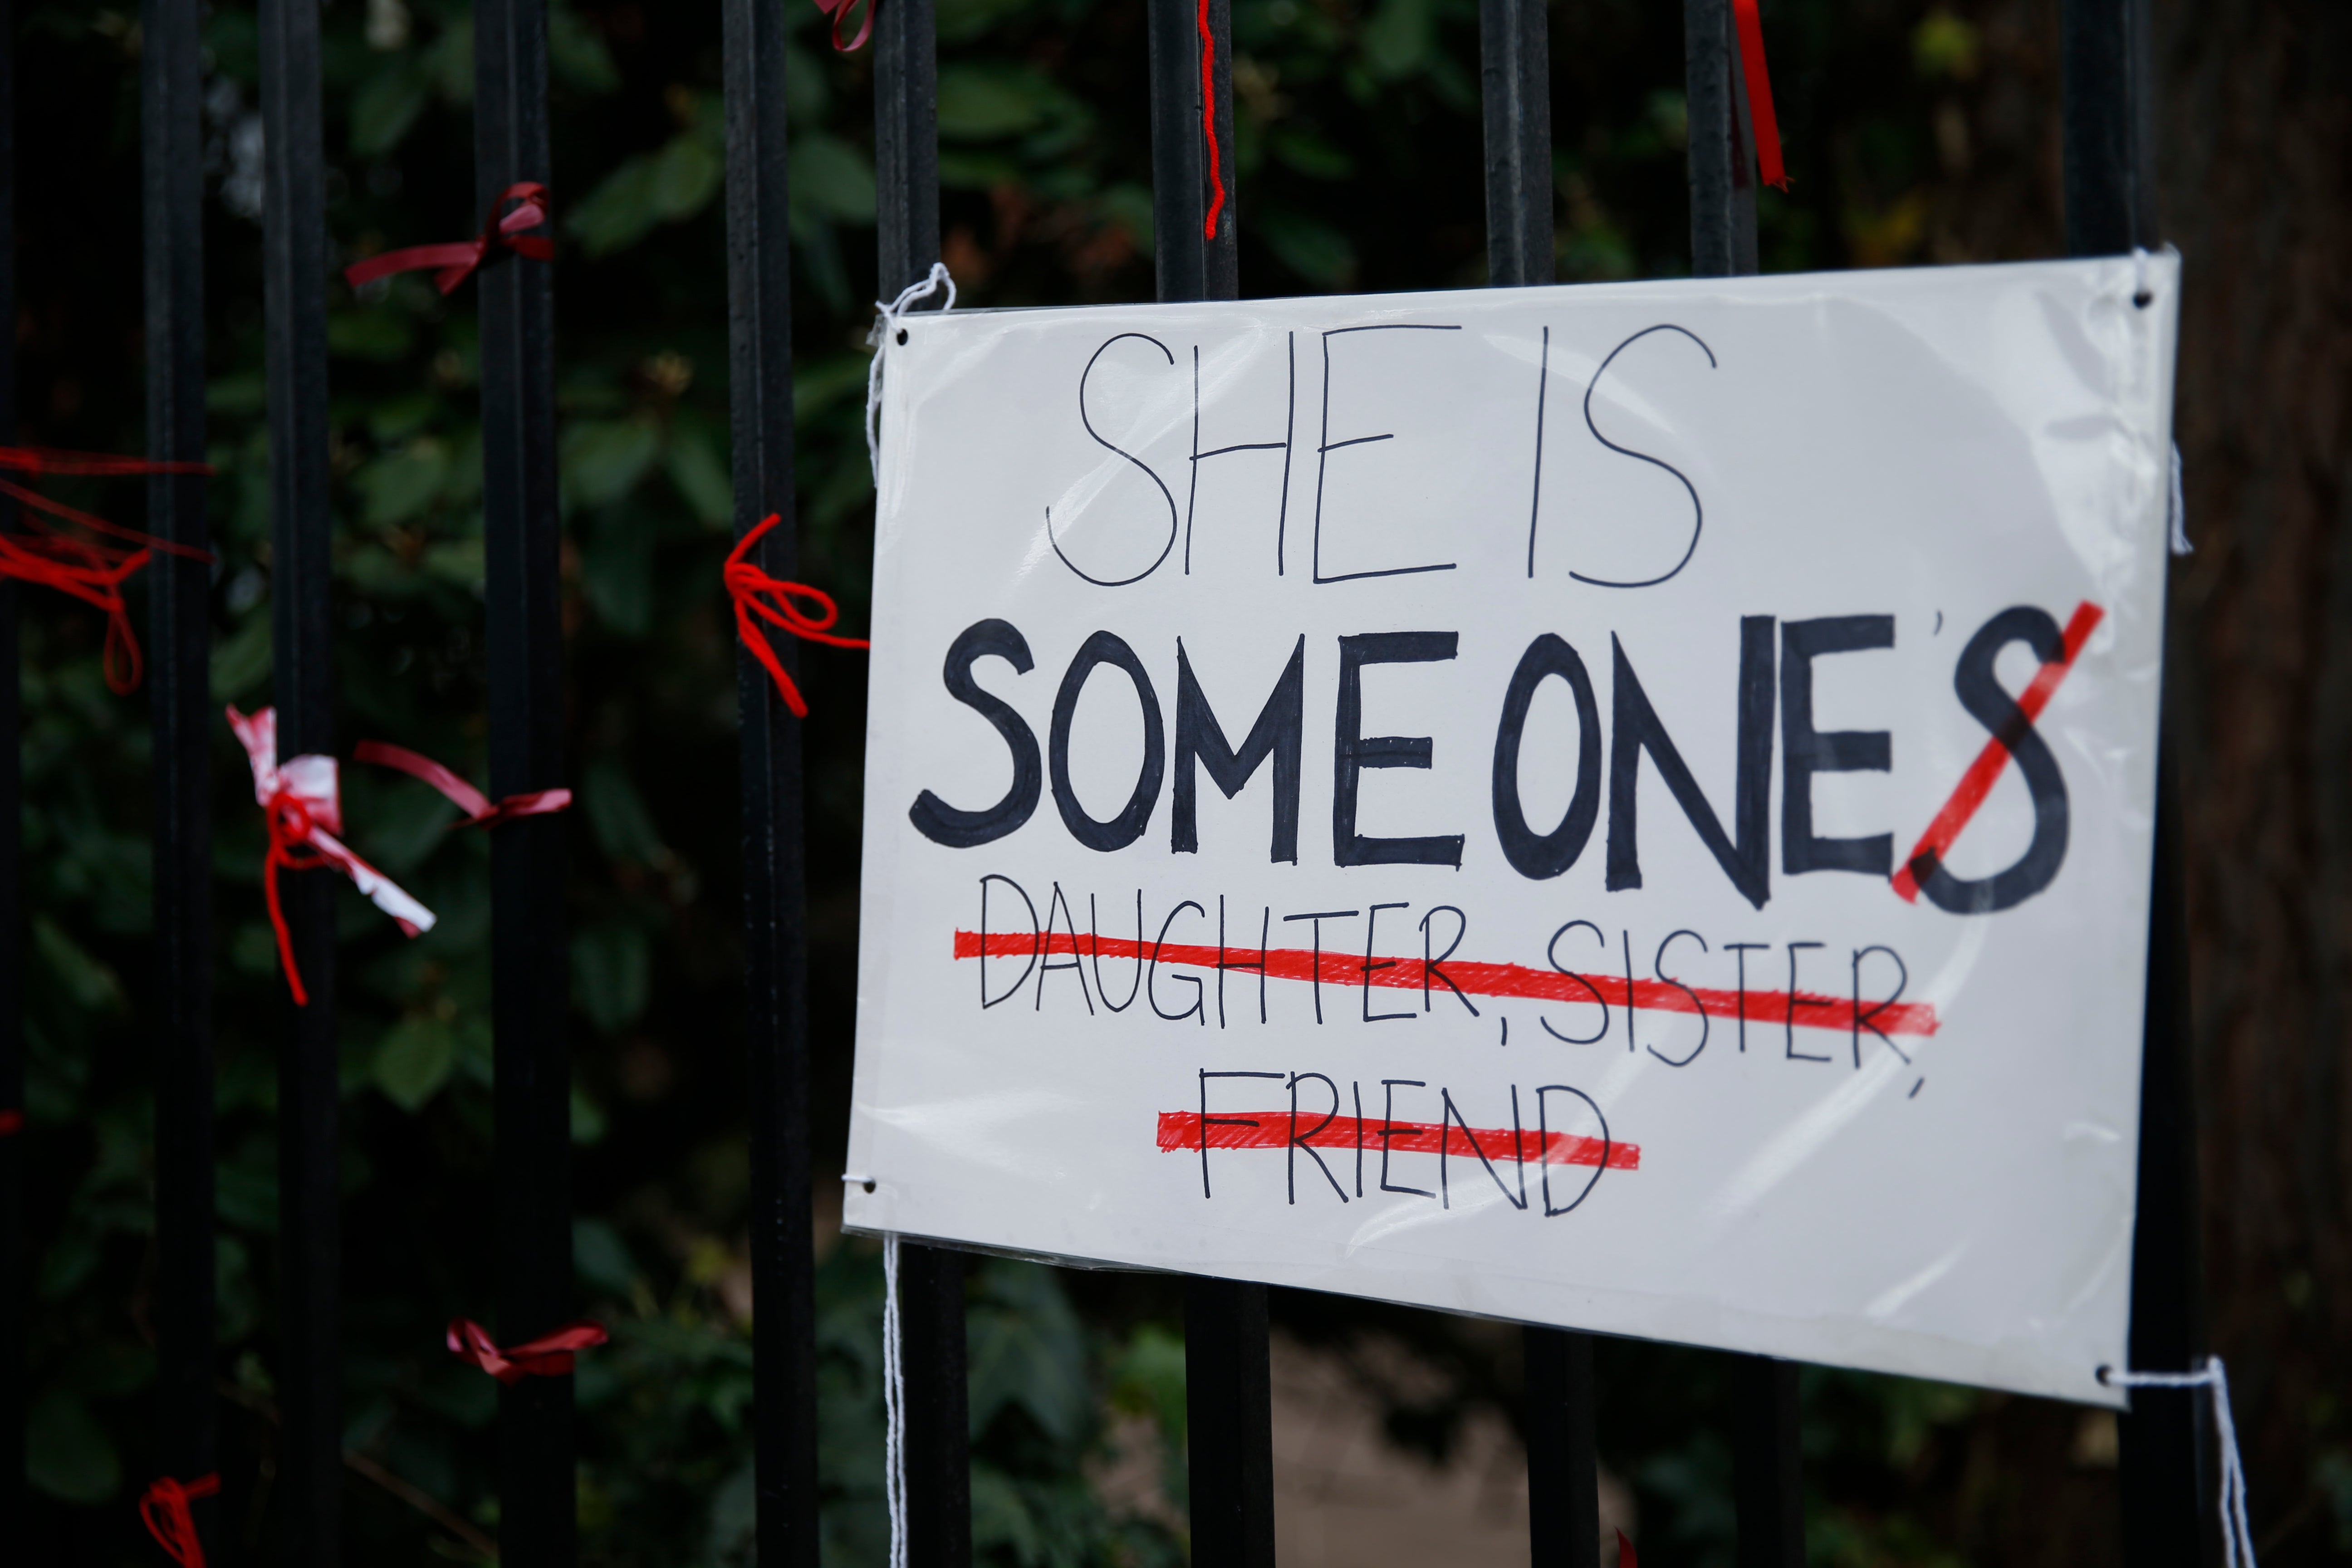 A placard outside James Allen’s Girls’ School (Jags) in London protests against ‘rape culture’